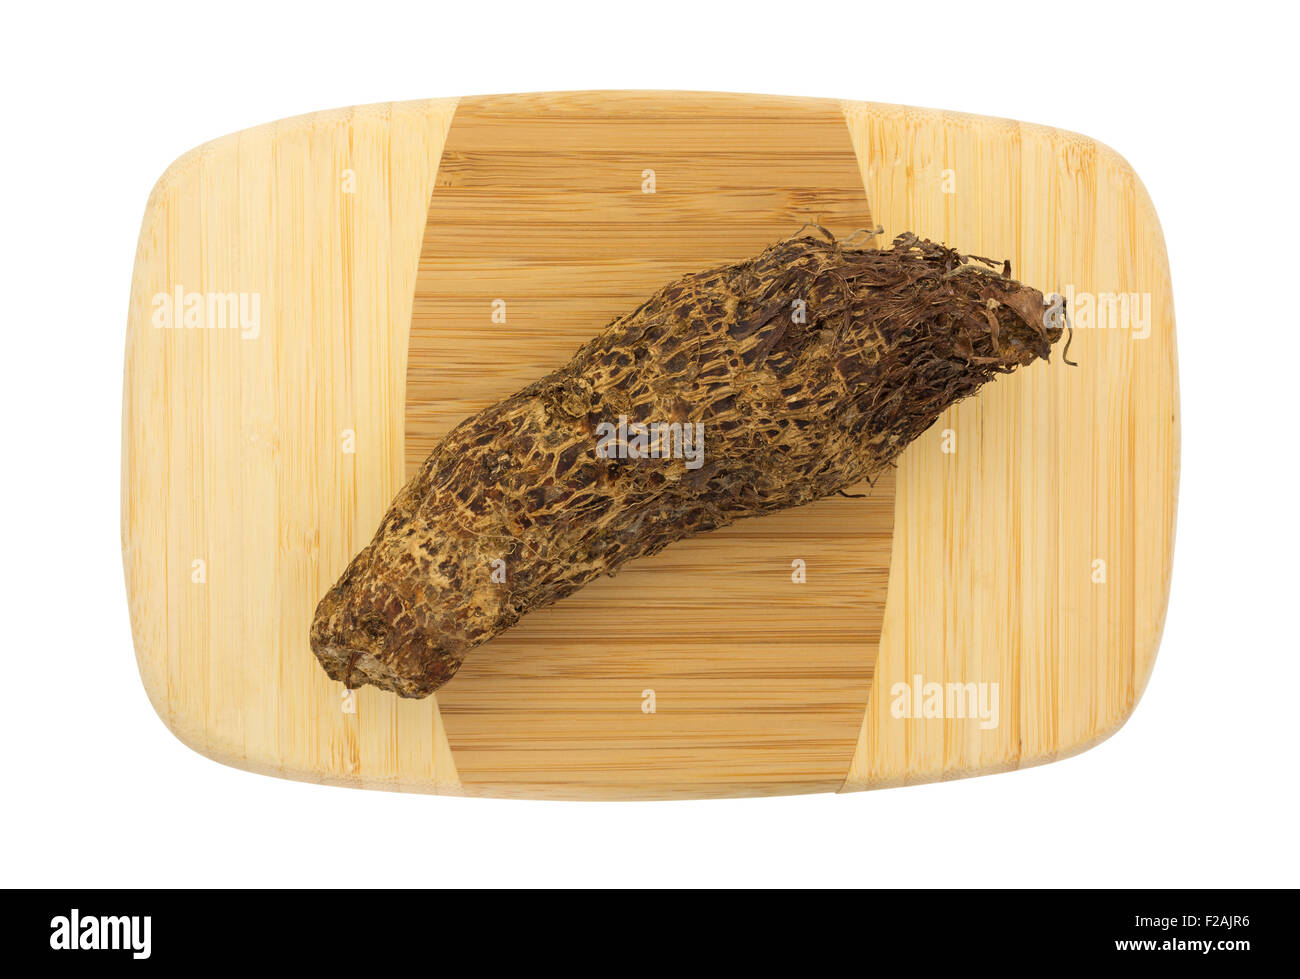 Top view of a fresh Malanga on a small wood cutting board isolated on a white background. Stock Photo